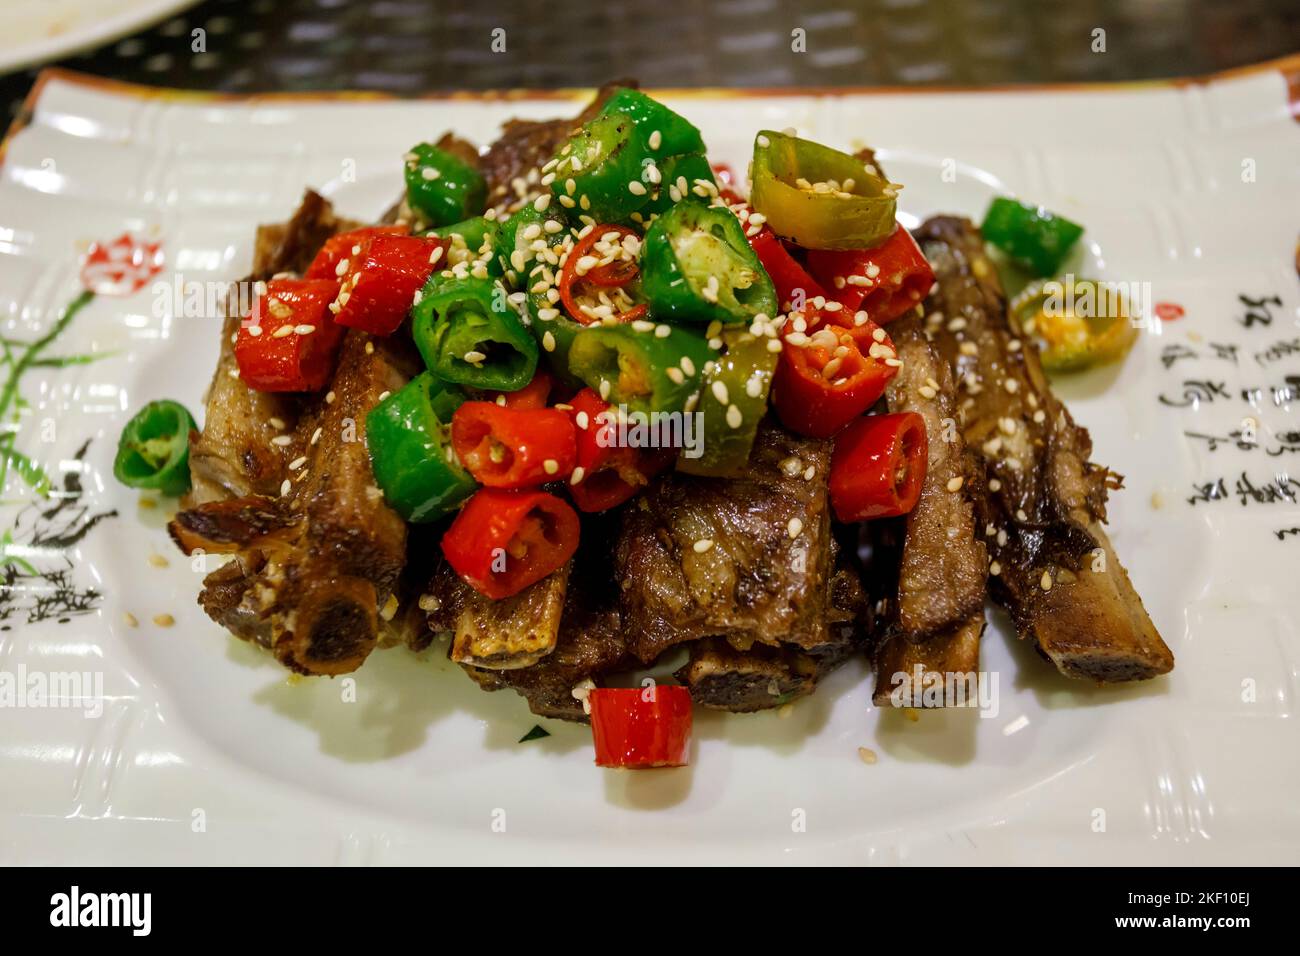 Plate of pork ribs fried with chili, Chinatown, Singapore Stock Photo